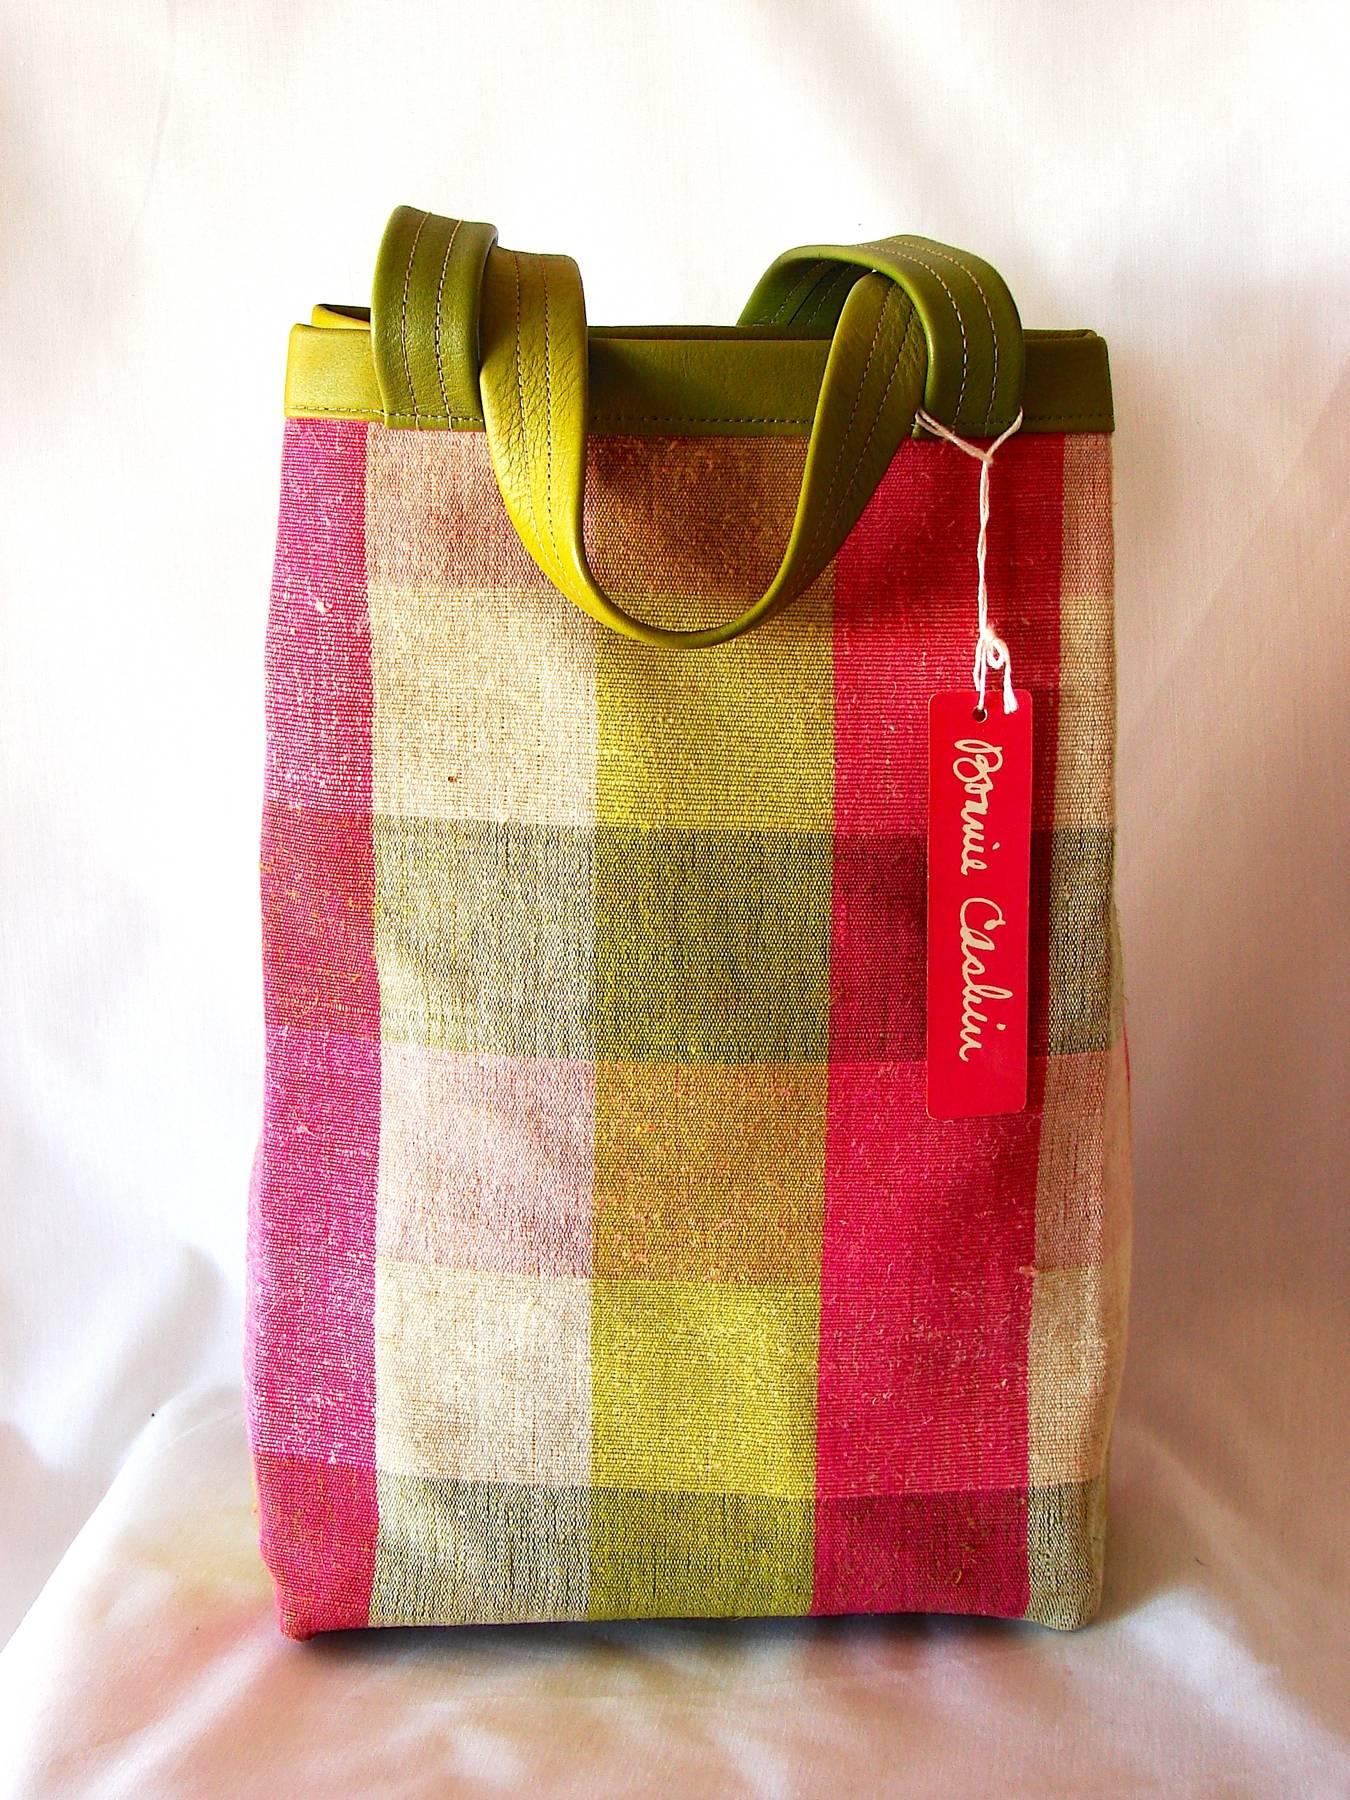 This lovely striped plaid canvas and leather tote bag was designed by Bonnie Cashin during her time at Coach in NYC, circa 1960s.  The canvas features Bonnie's signature vibrant palette in shades of pink, lime and oatmeal, and the bag is trimmed in